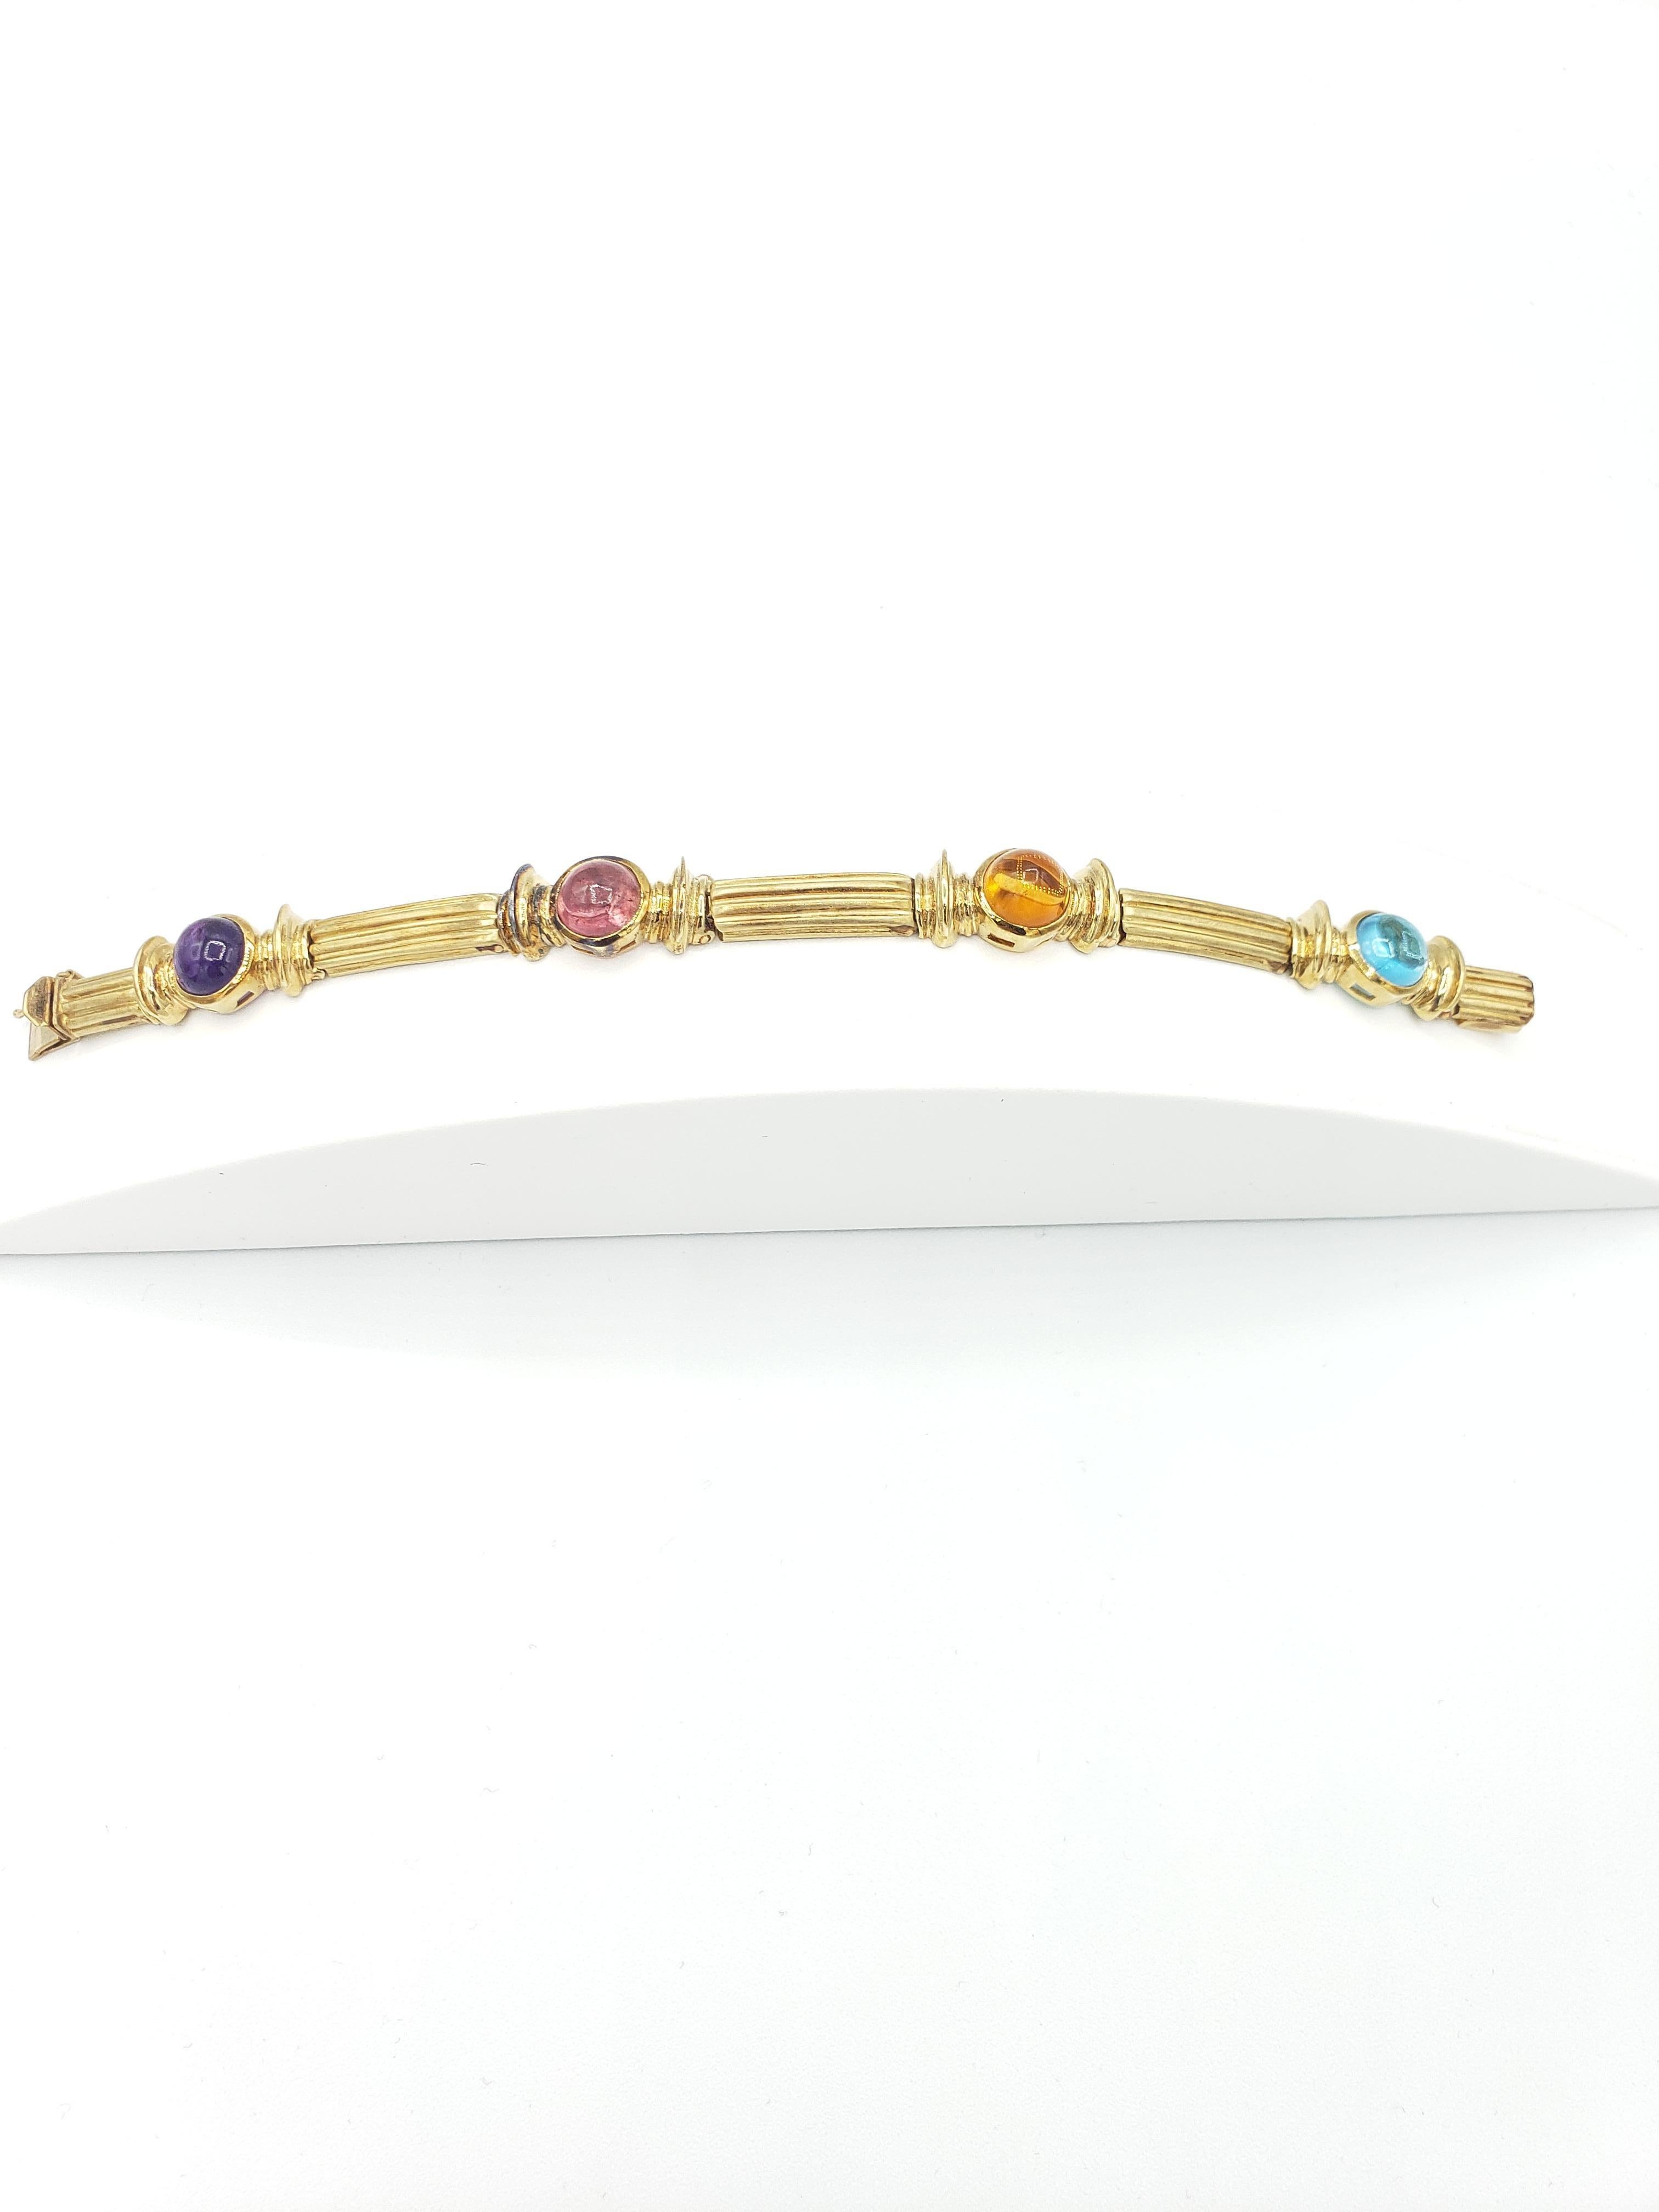 Byzantine NEW Blue and Pink Tourmaline, Amethyst, Citrine Bracelet in 14k Yellow Gold For Sale